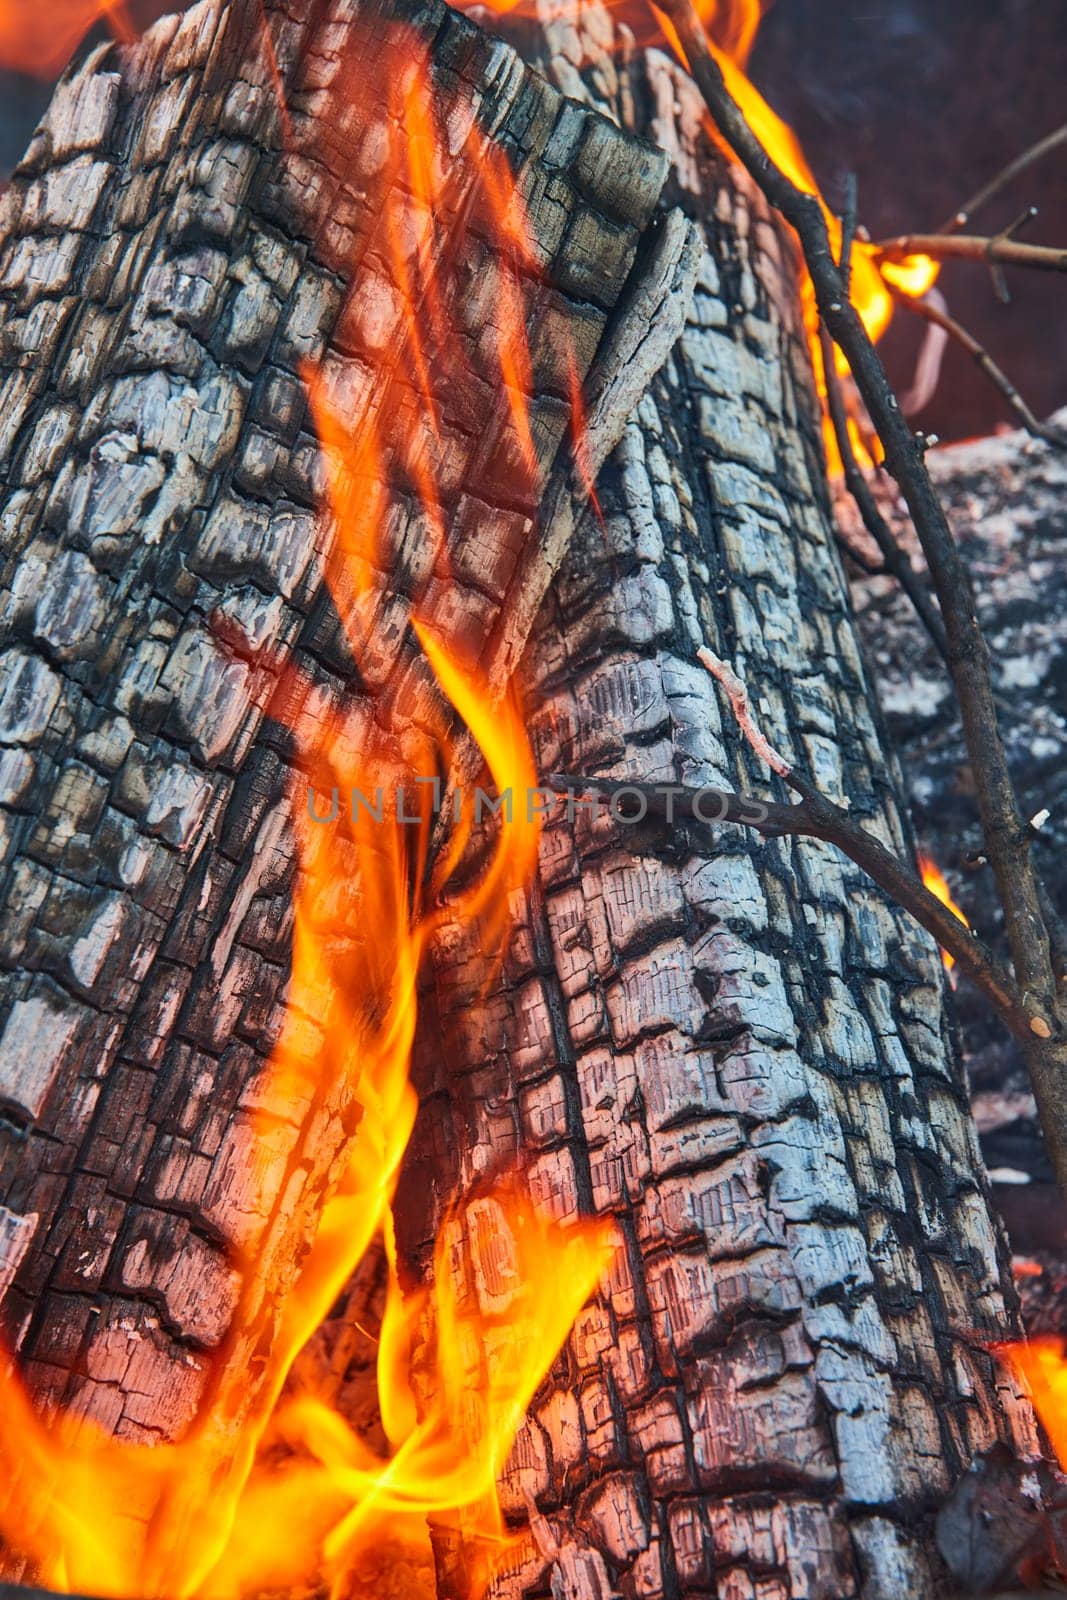 Image of Orange and yellow flames lapping at two ashen logs close up background asset